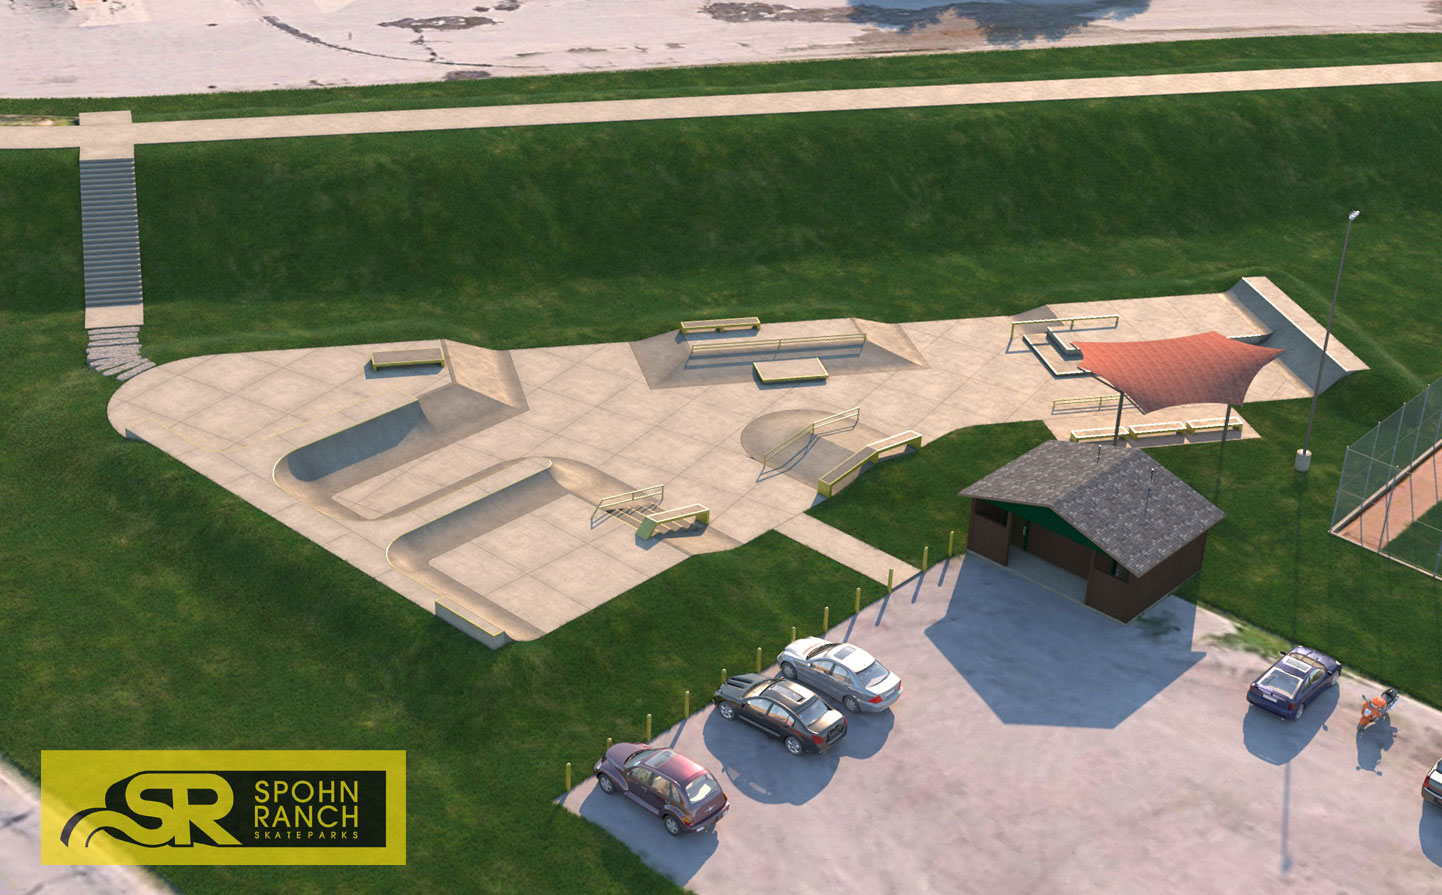 Skatepark in Waterloo Iowa Design and Built by Spohn Ranch with integrated sun shade